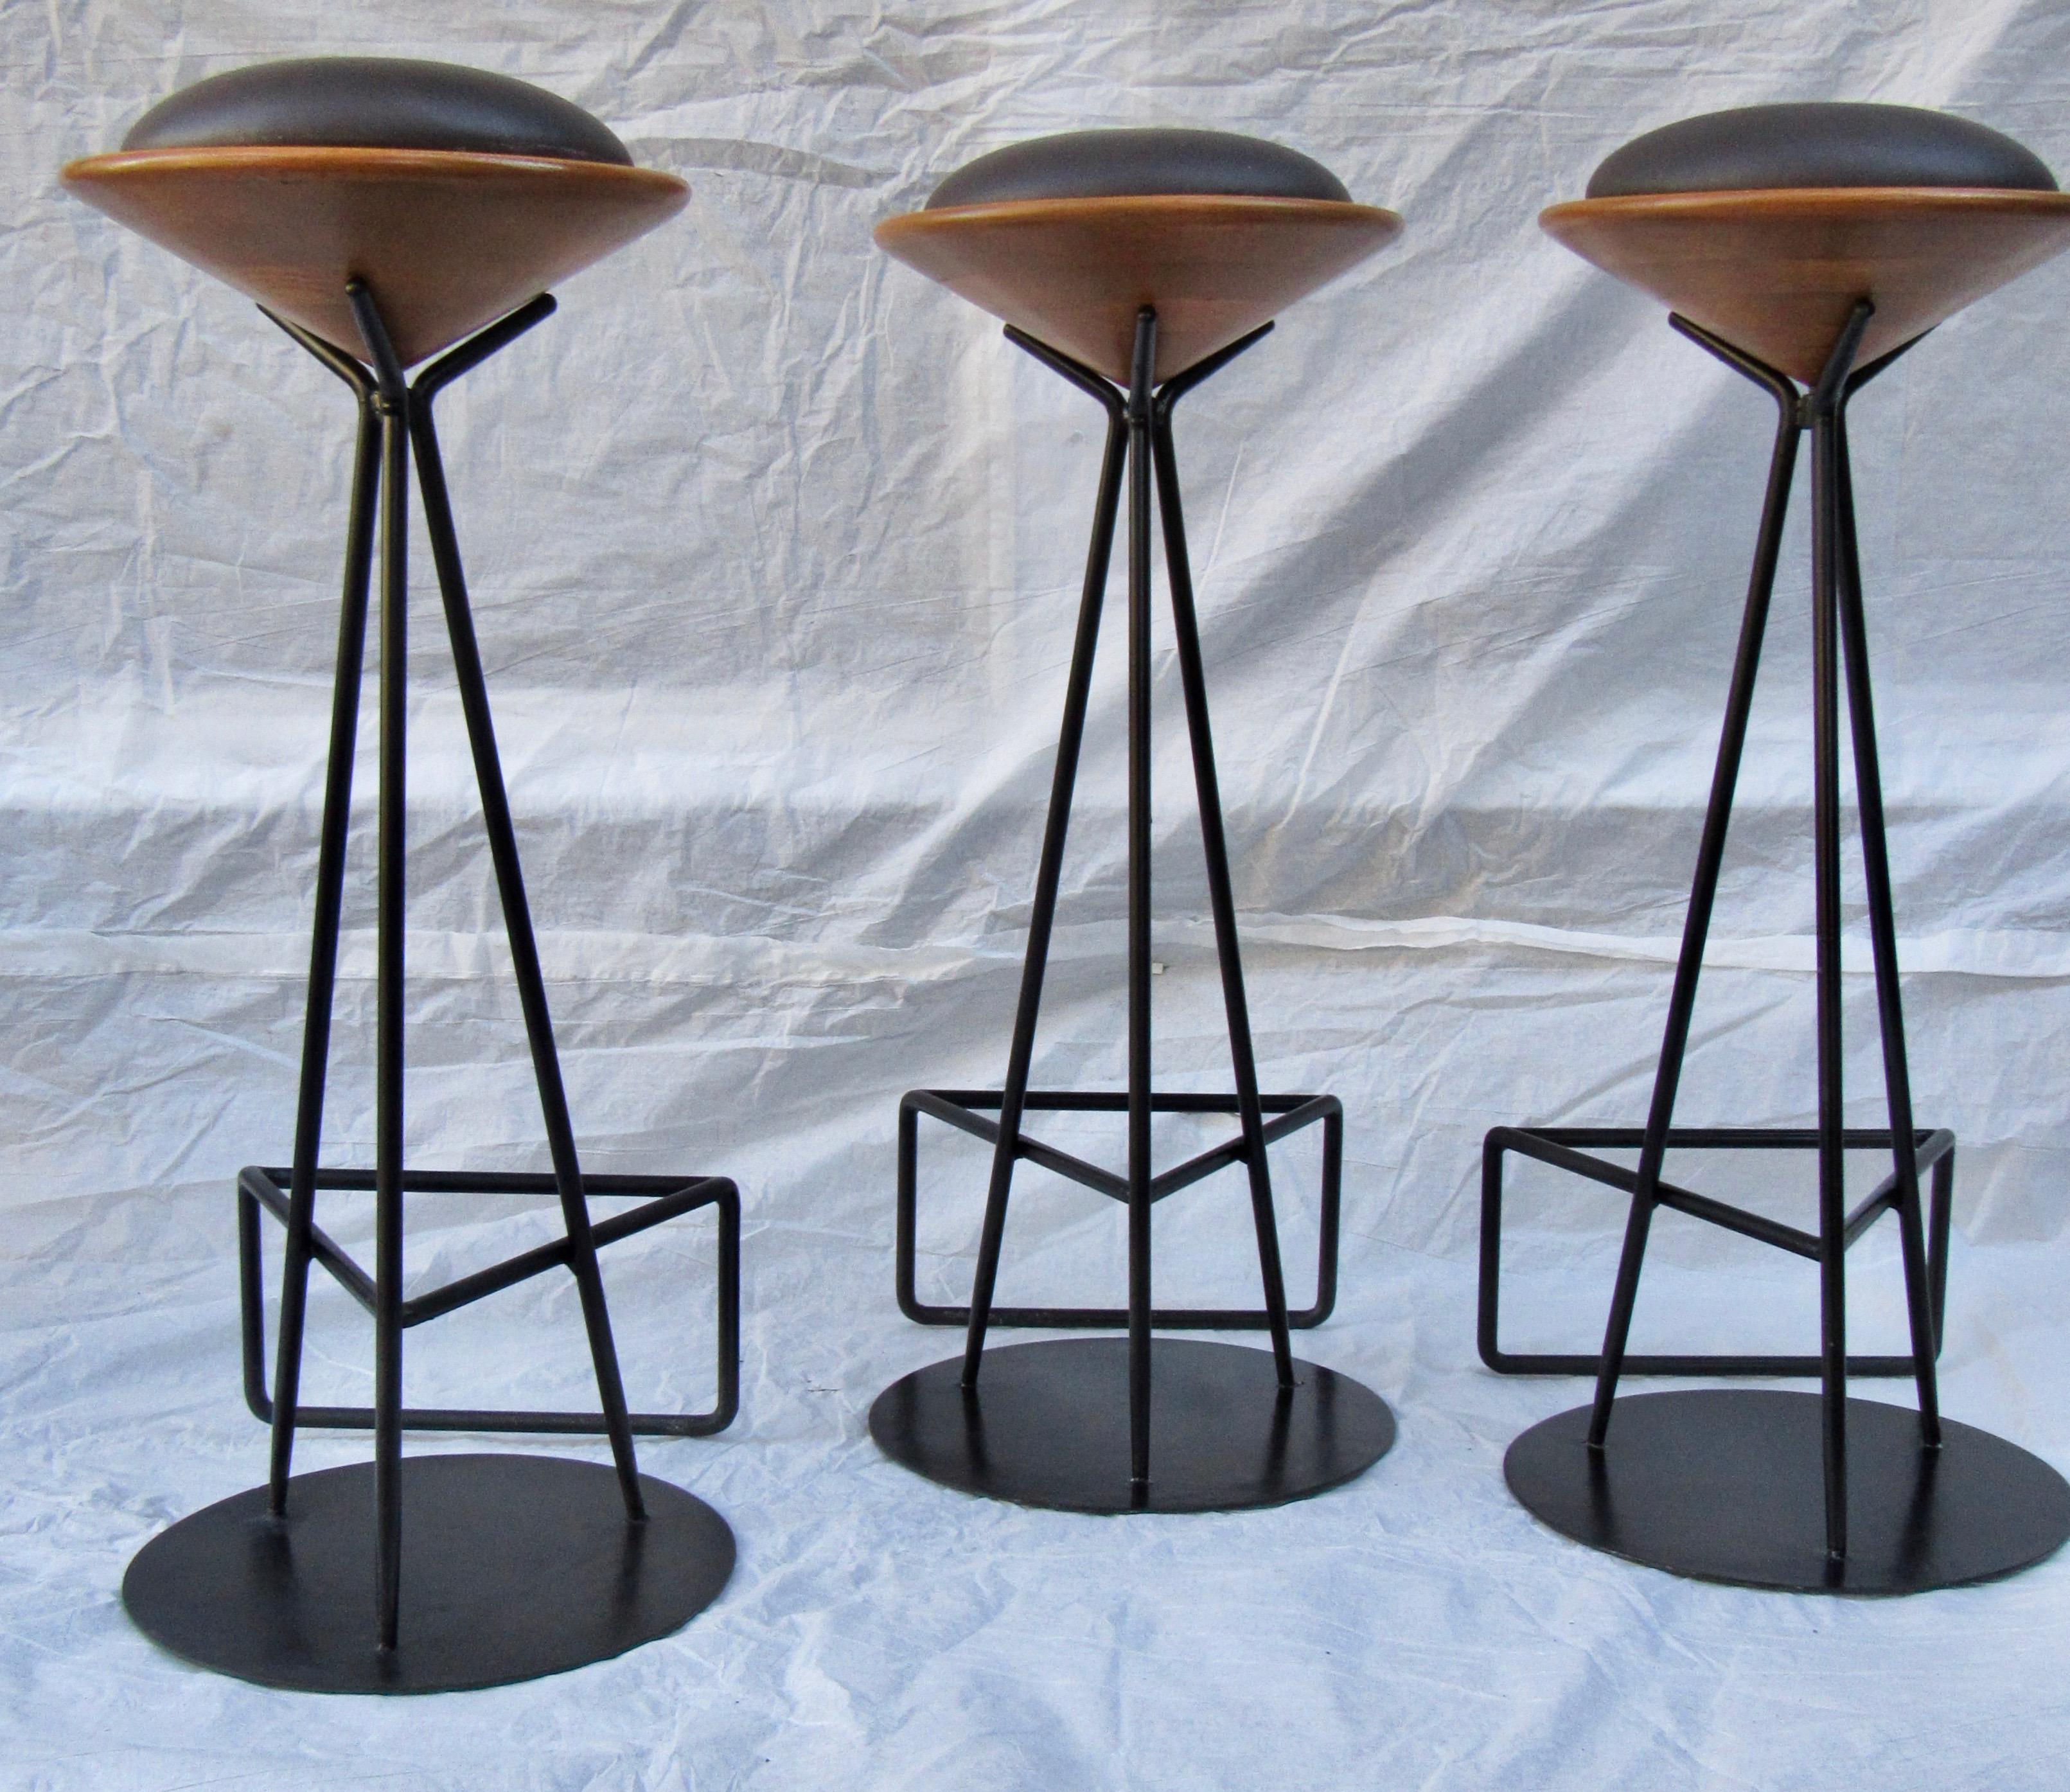 Three wrought iron bar stools from Palm Springs, circa 1960s. 
The seat supports are laminated oak that are lathe turned which hold the seat cushion.
The bar stools are in excellent condition.